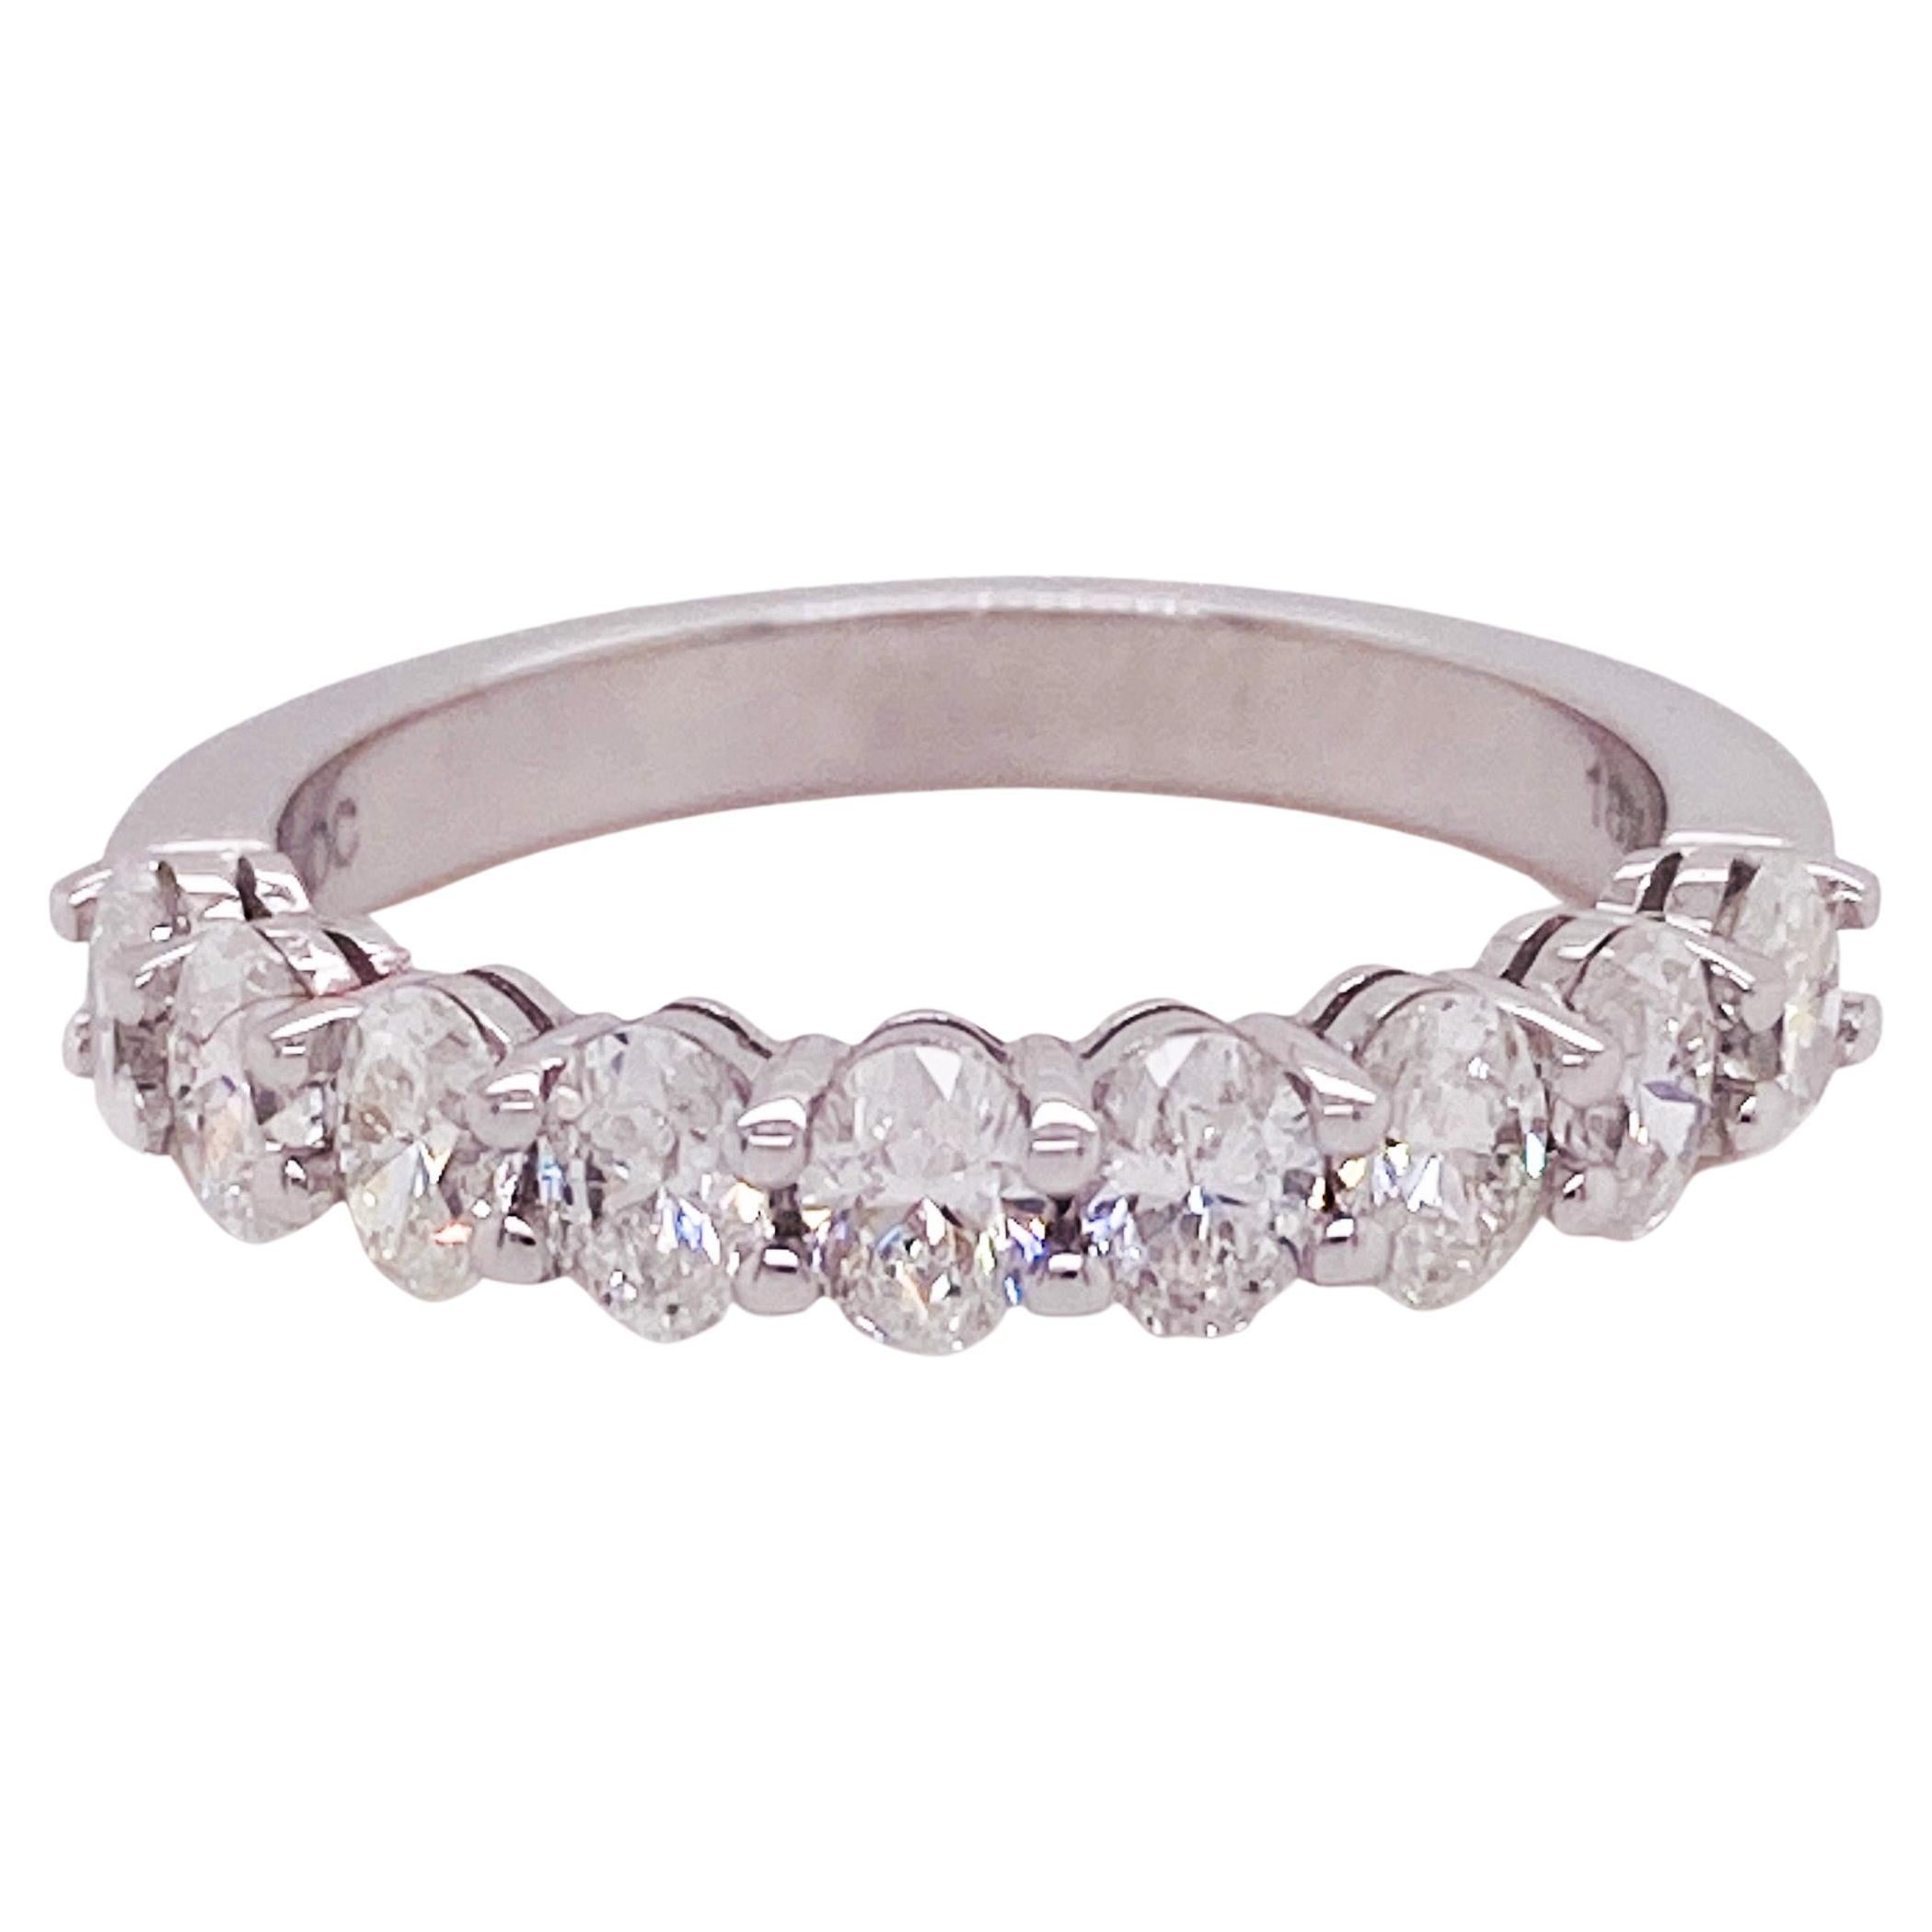 Oval Diamond Ring w Half Eternity Band in 18K White Gold w 1.40 Carat Total Wt